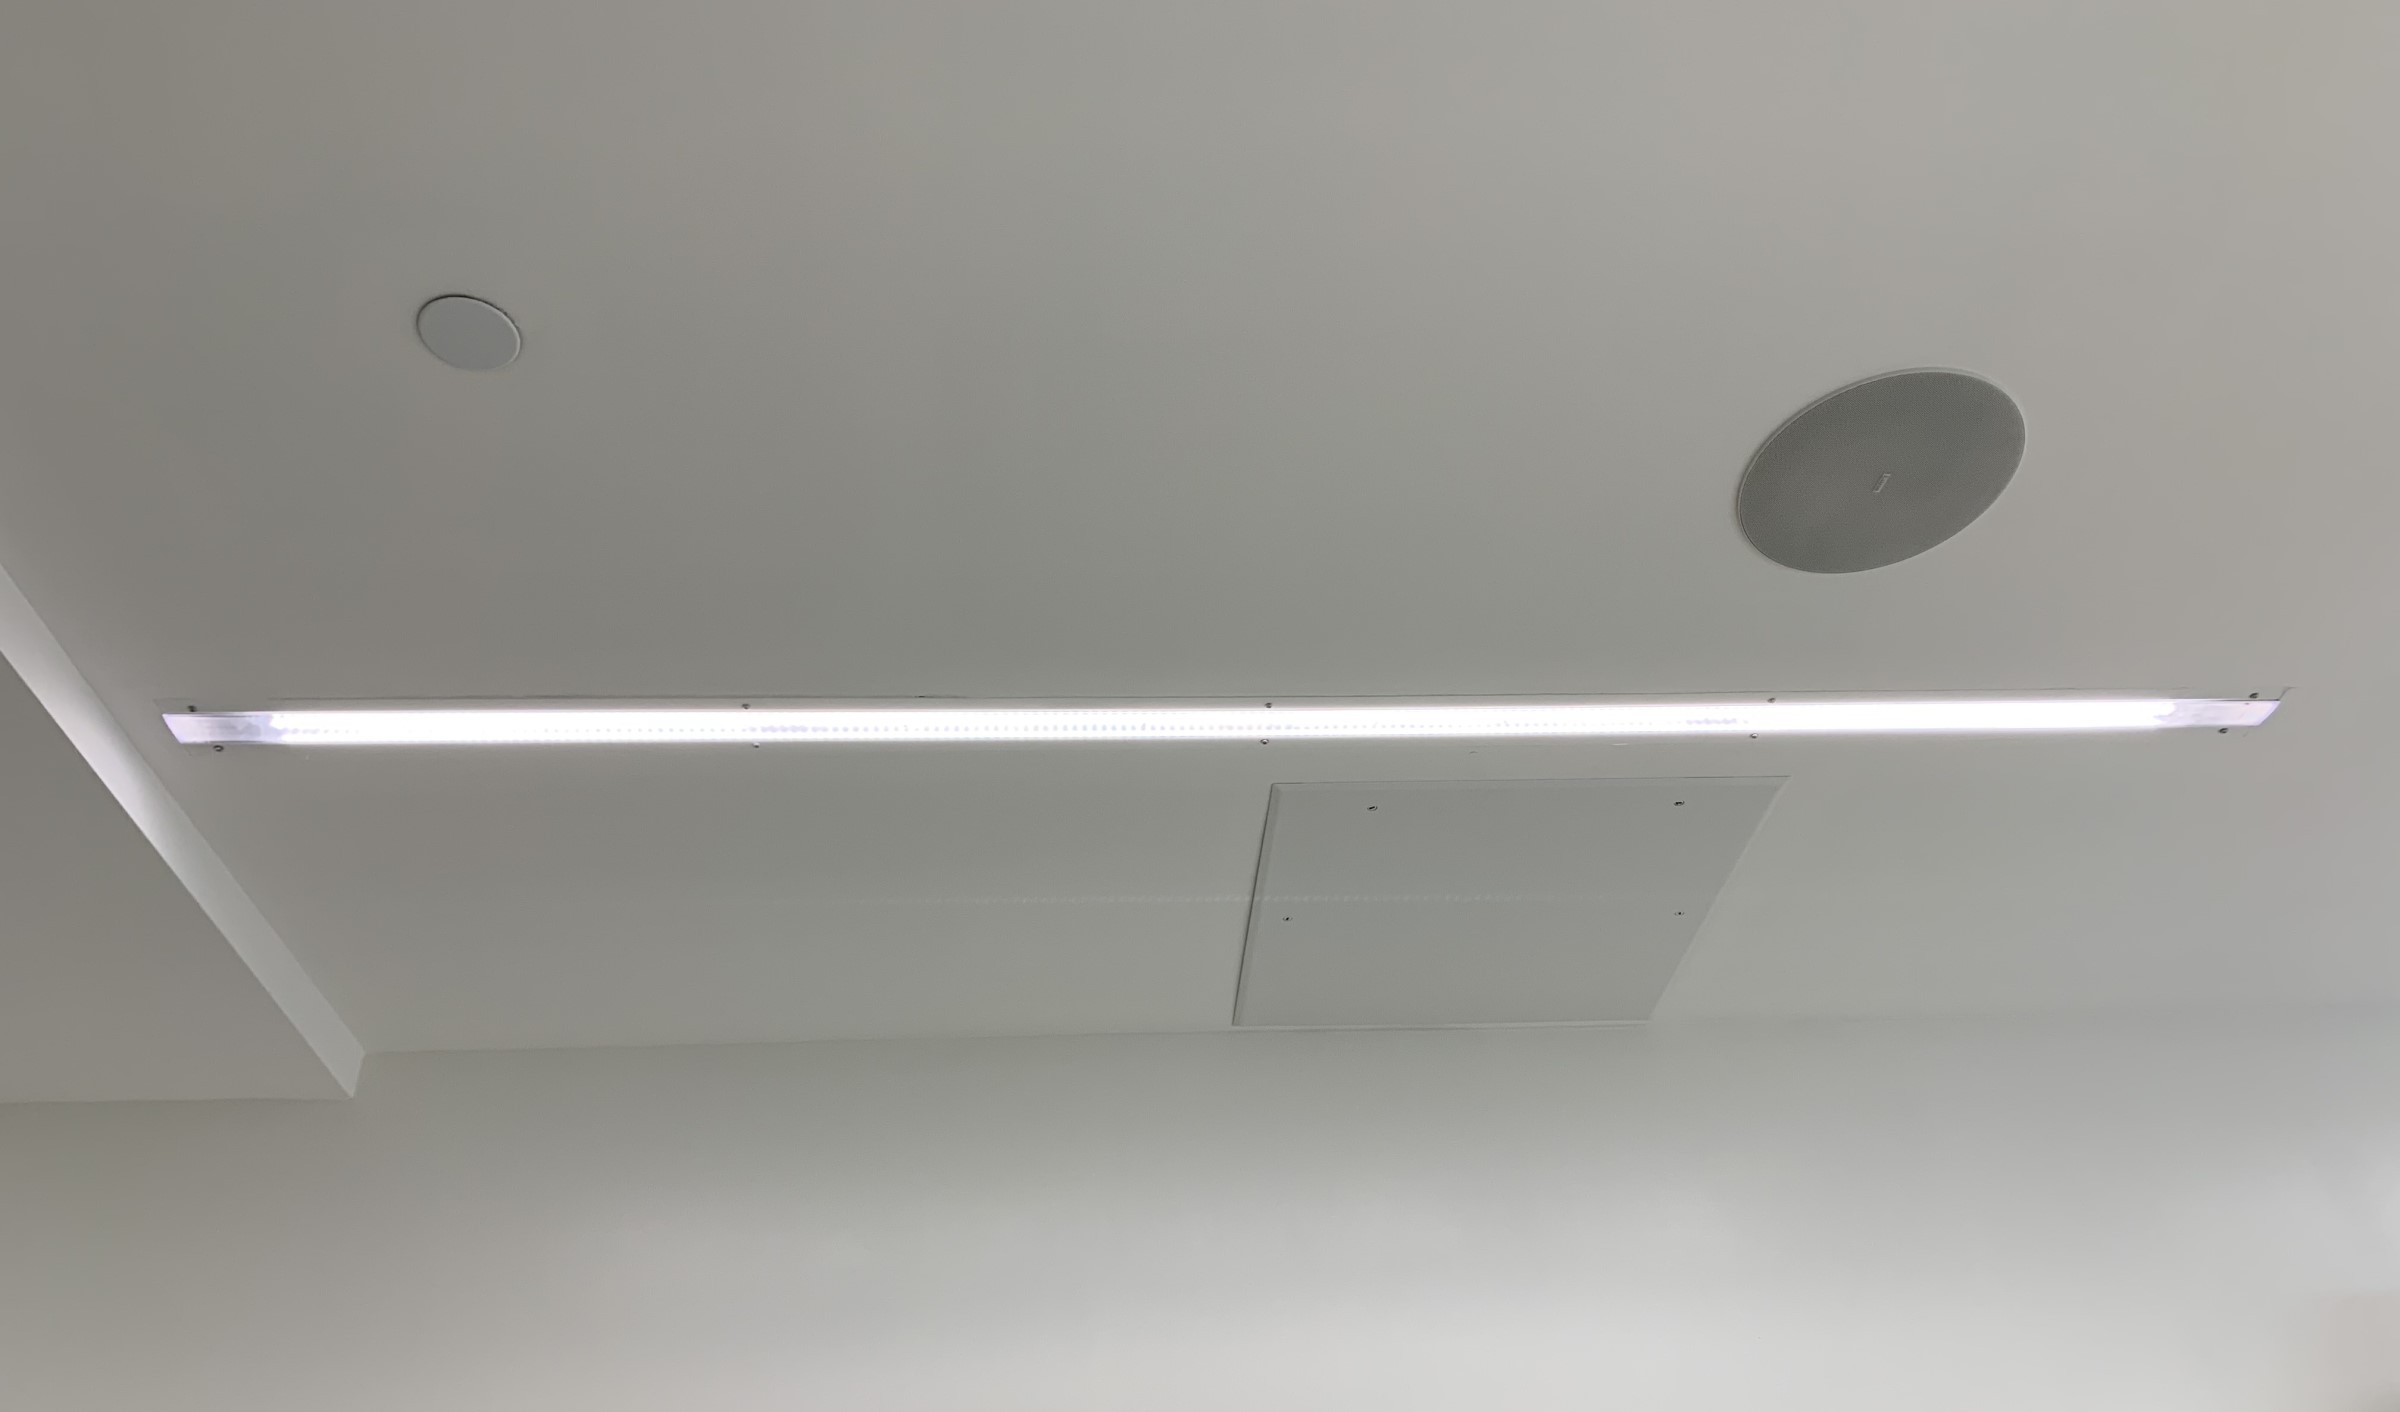 A uLED fixture installed in an operating room ceiling